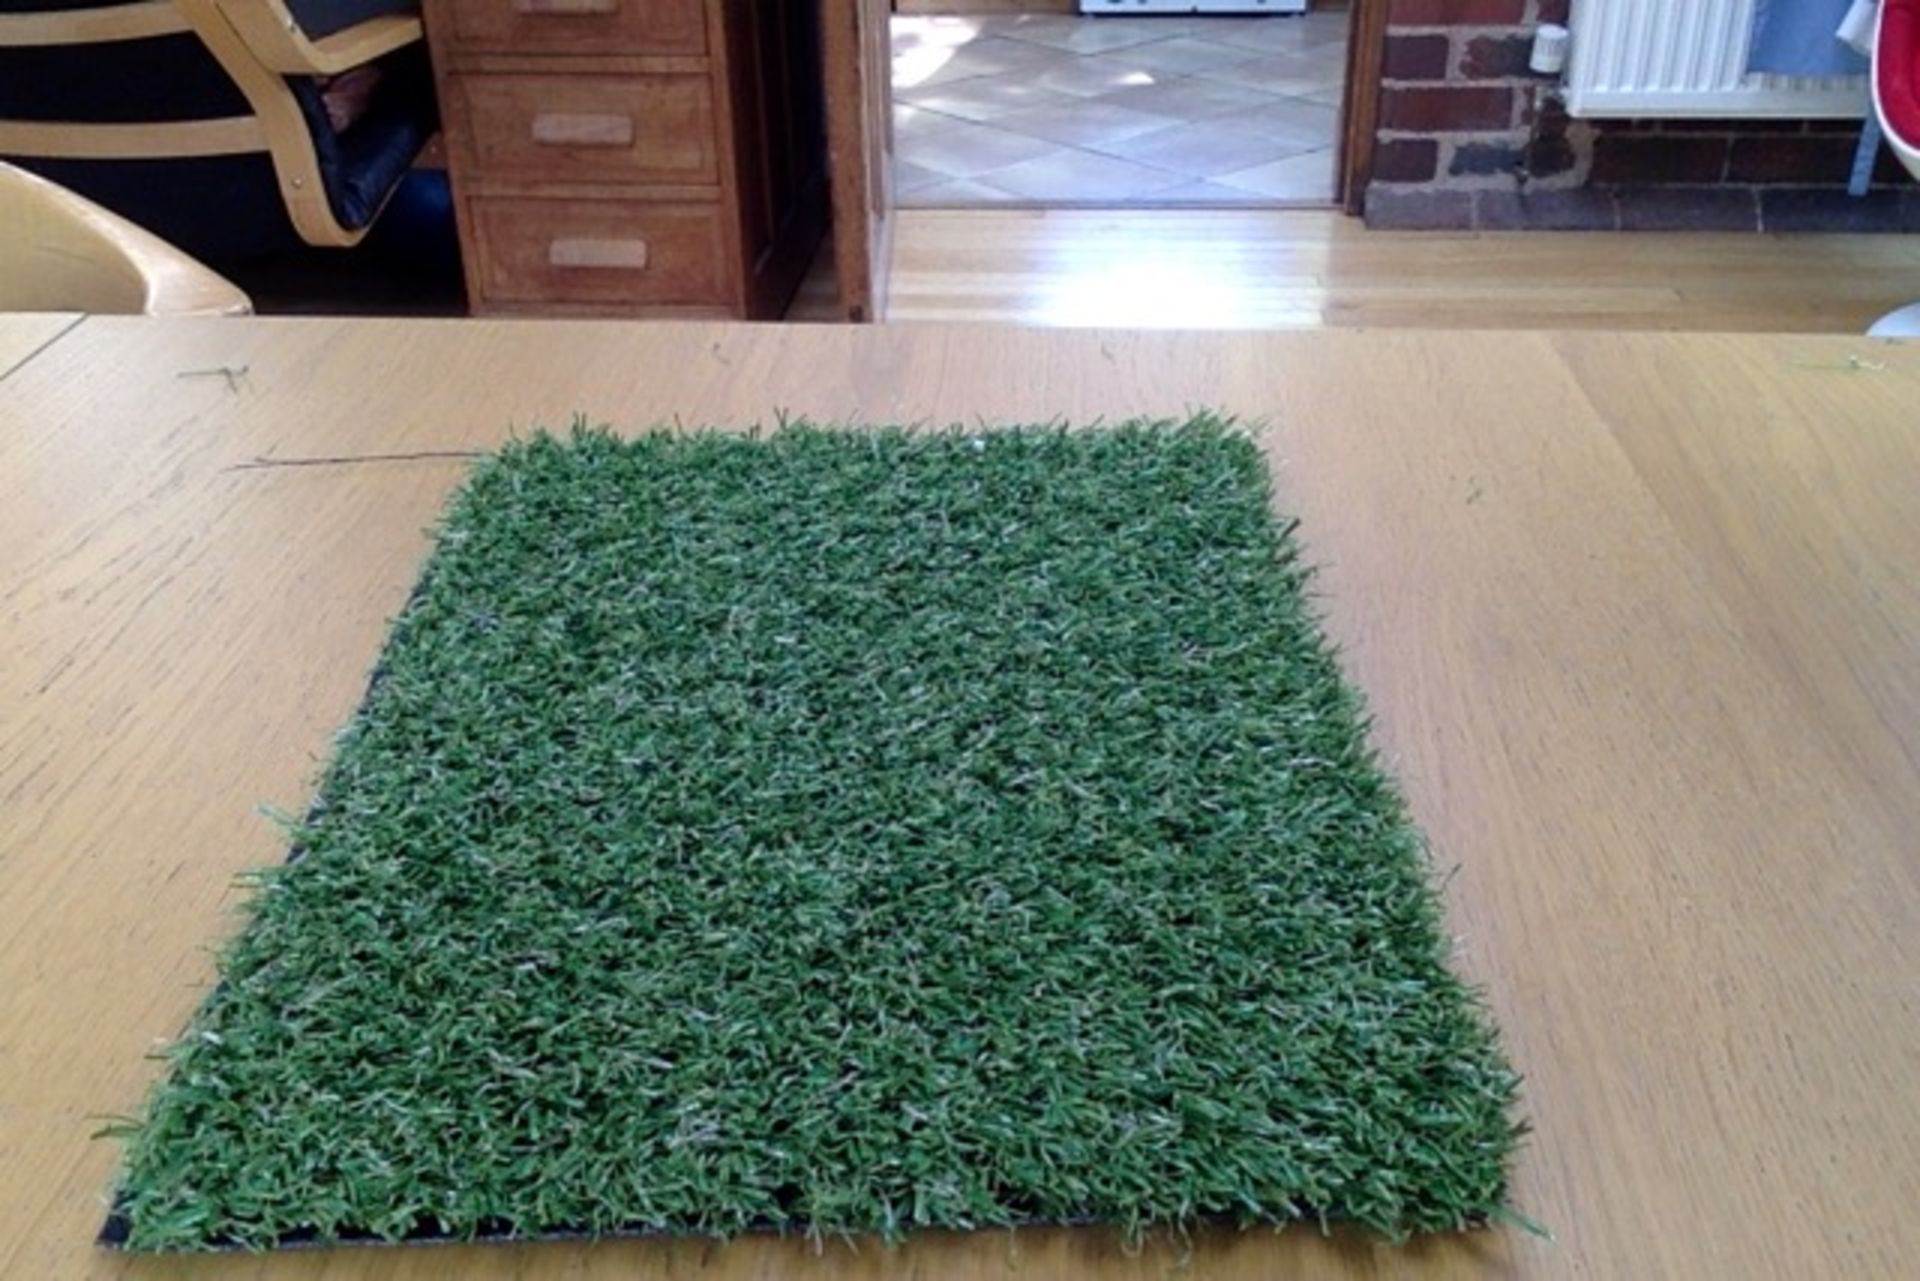 Artificial Grass - 20mm thick

25x4m roll - Total 100m2

This range of artificial turf is designed